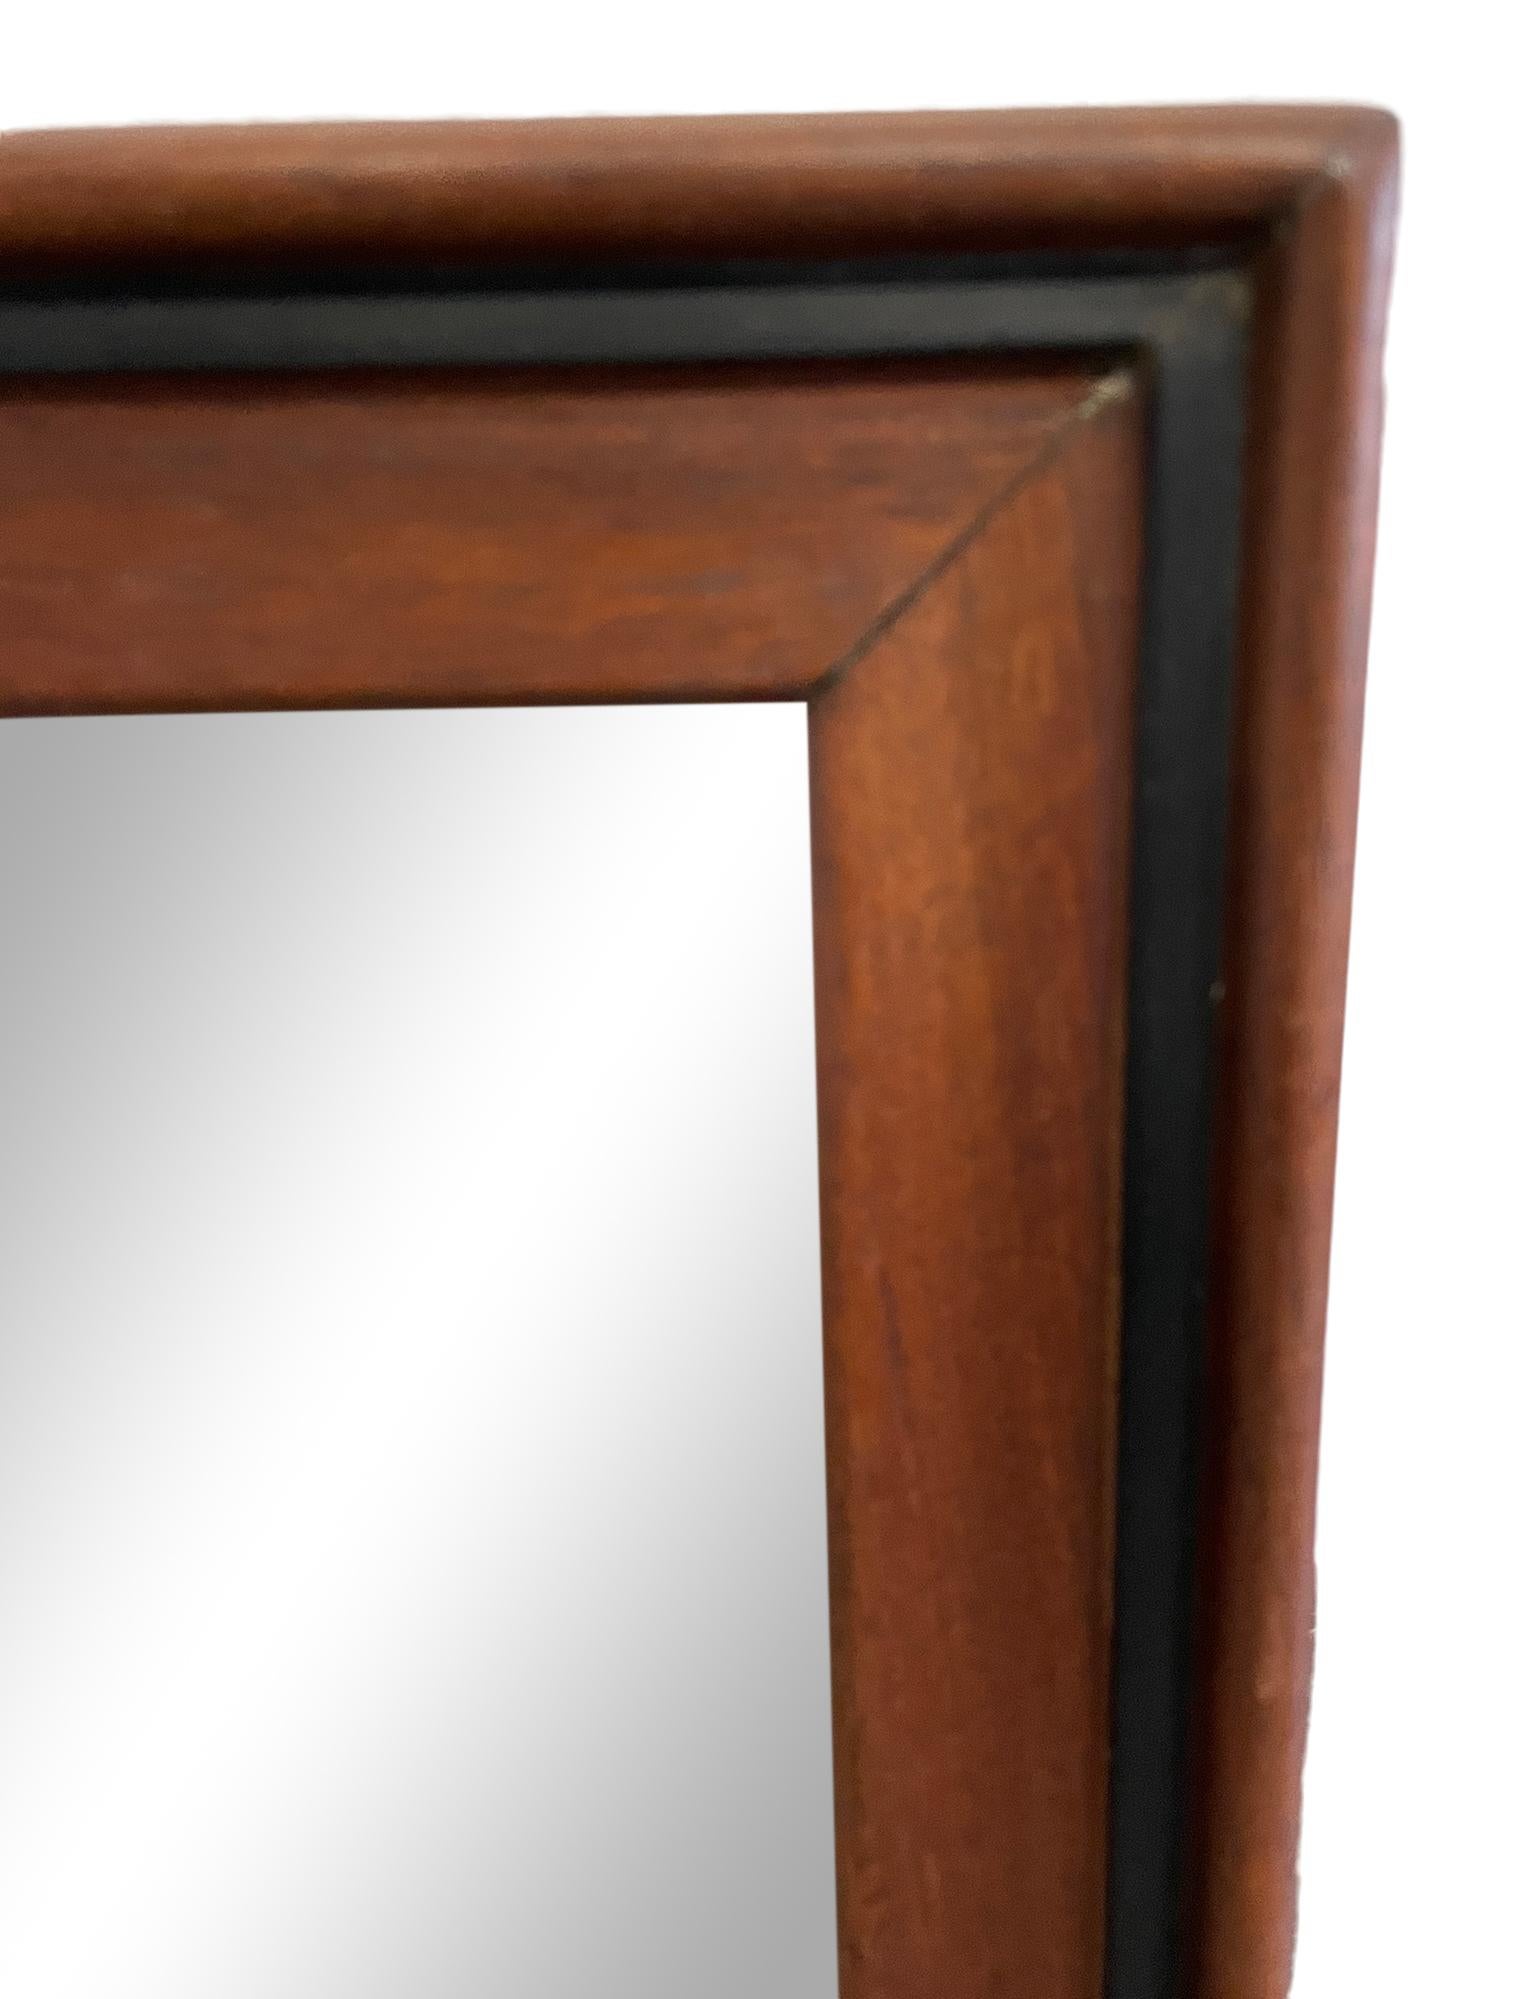 Wonderful Scandinavian Danish modern teak wood mirror. not Wired to hang. Very solid mirror with solid teak wood frame with a black lacquer detail. 22